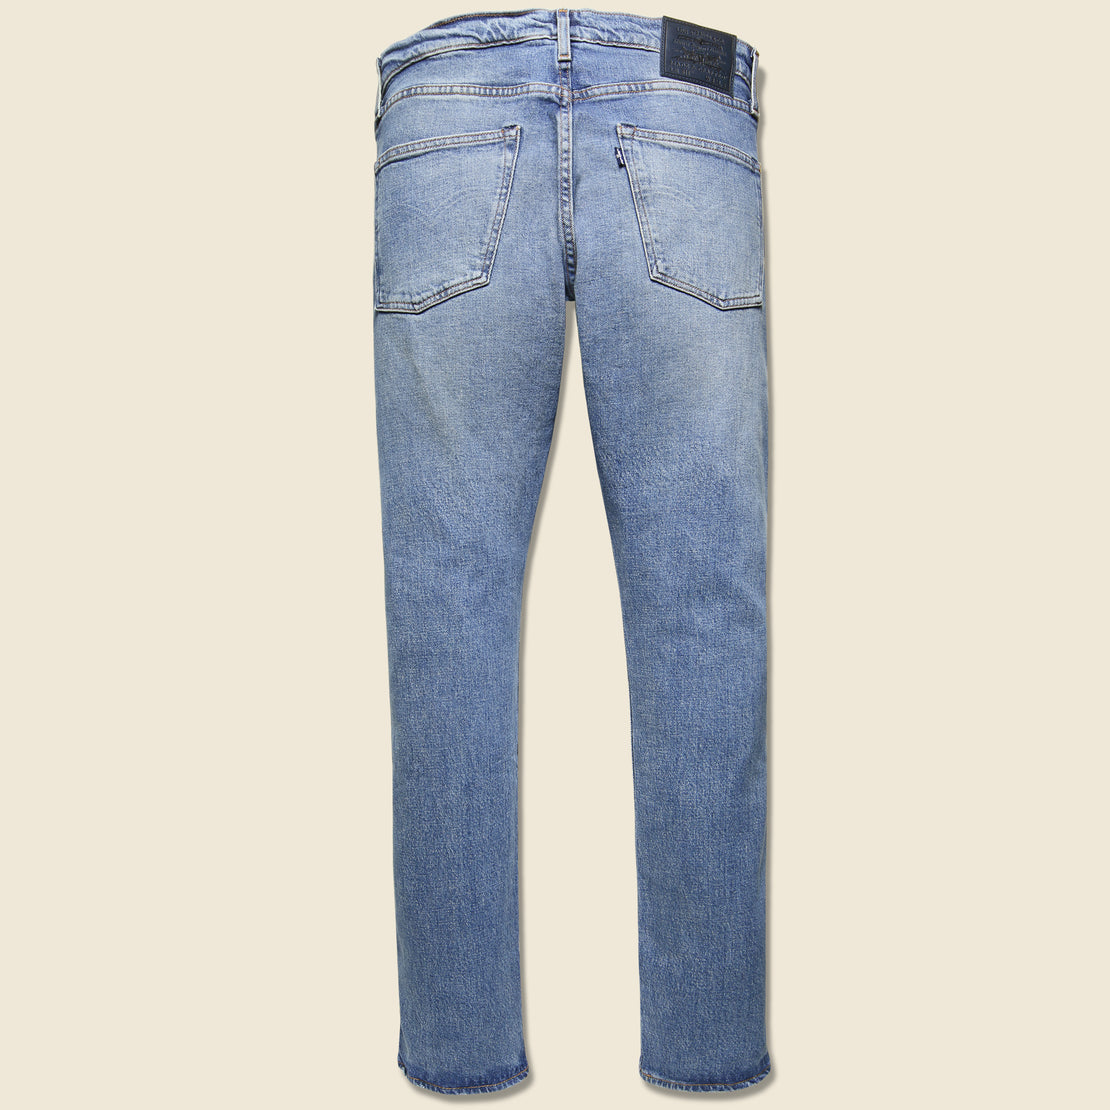 511 Jean - Houston - Levis Made & Crafted - STAG Provisions - Pants - Denim